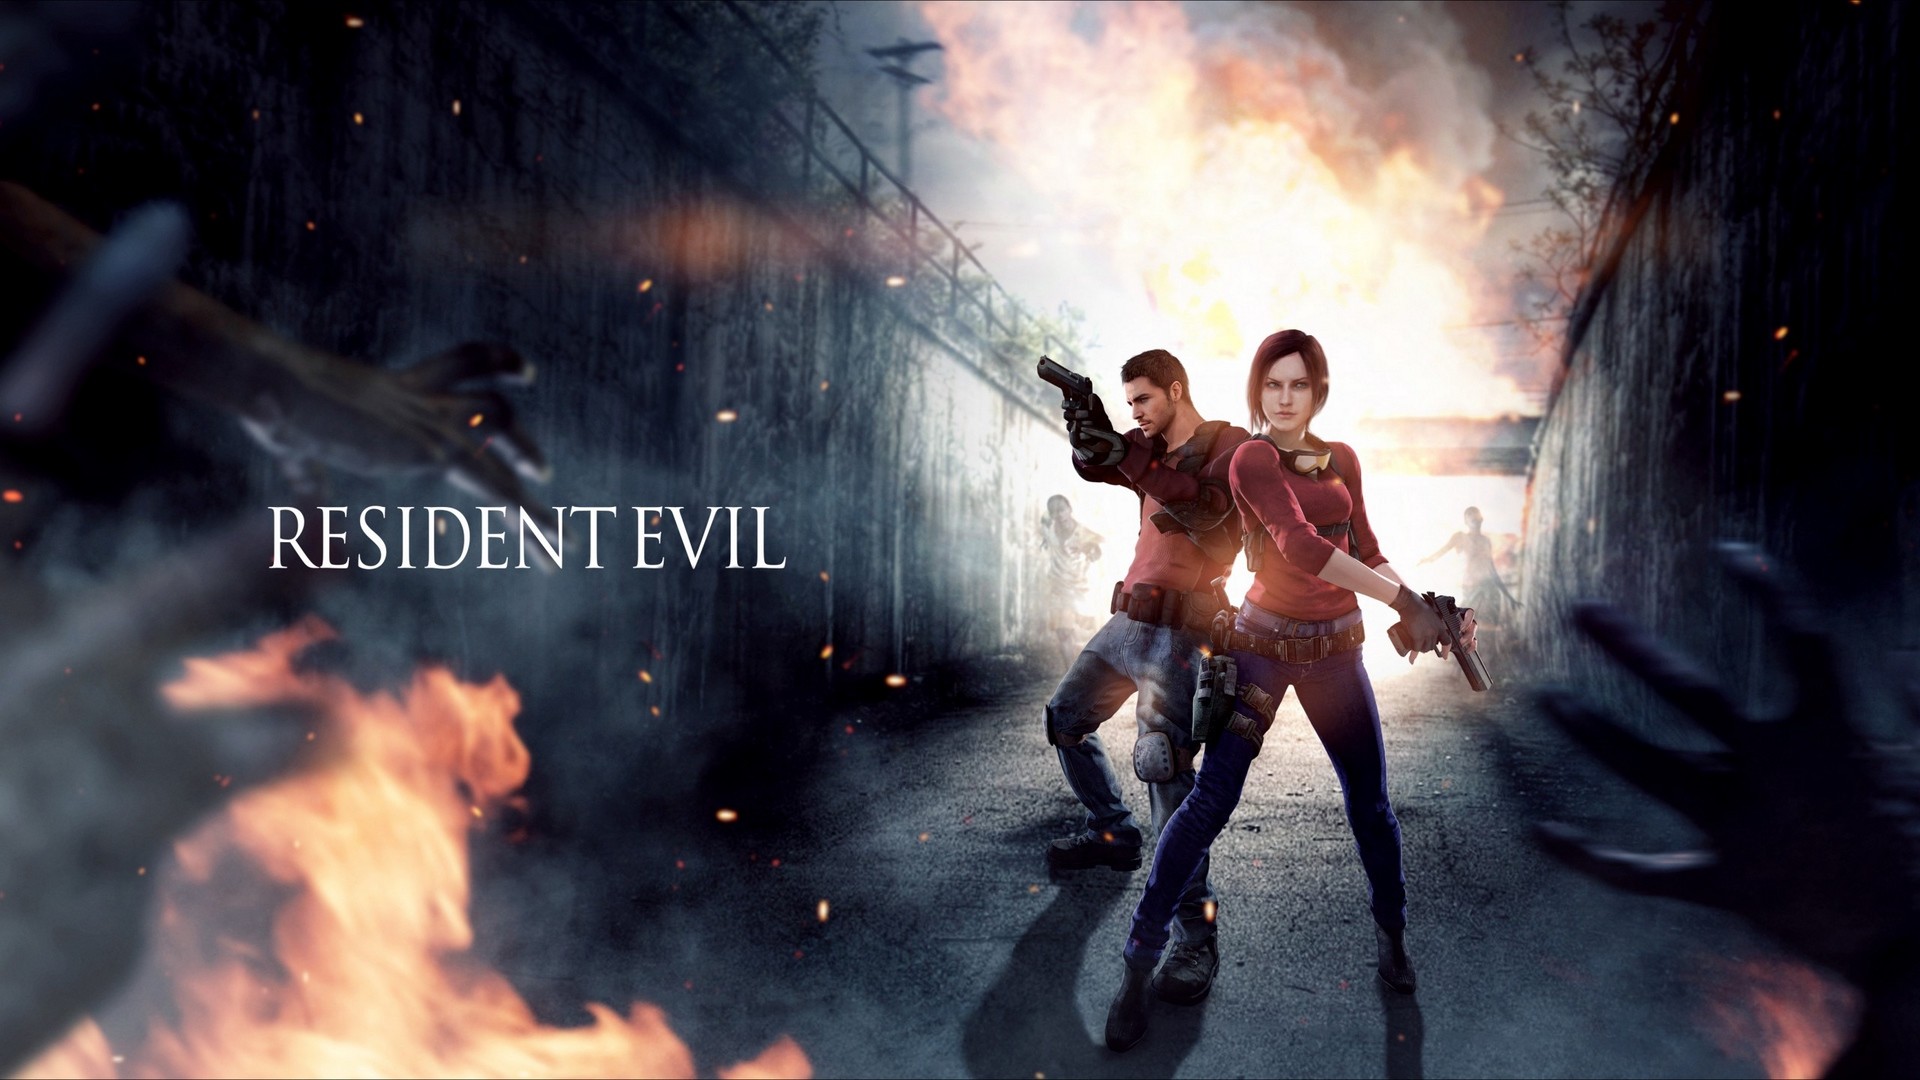 1920x1080  Wallpaper resident evil, claire redfield, chris redfield